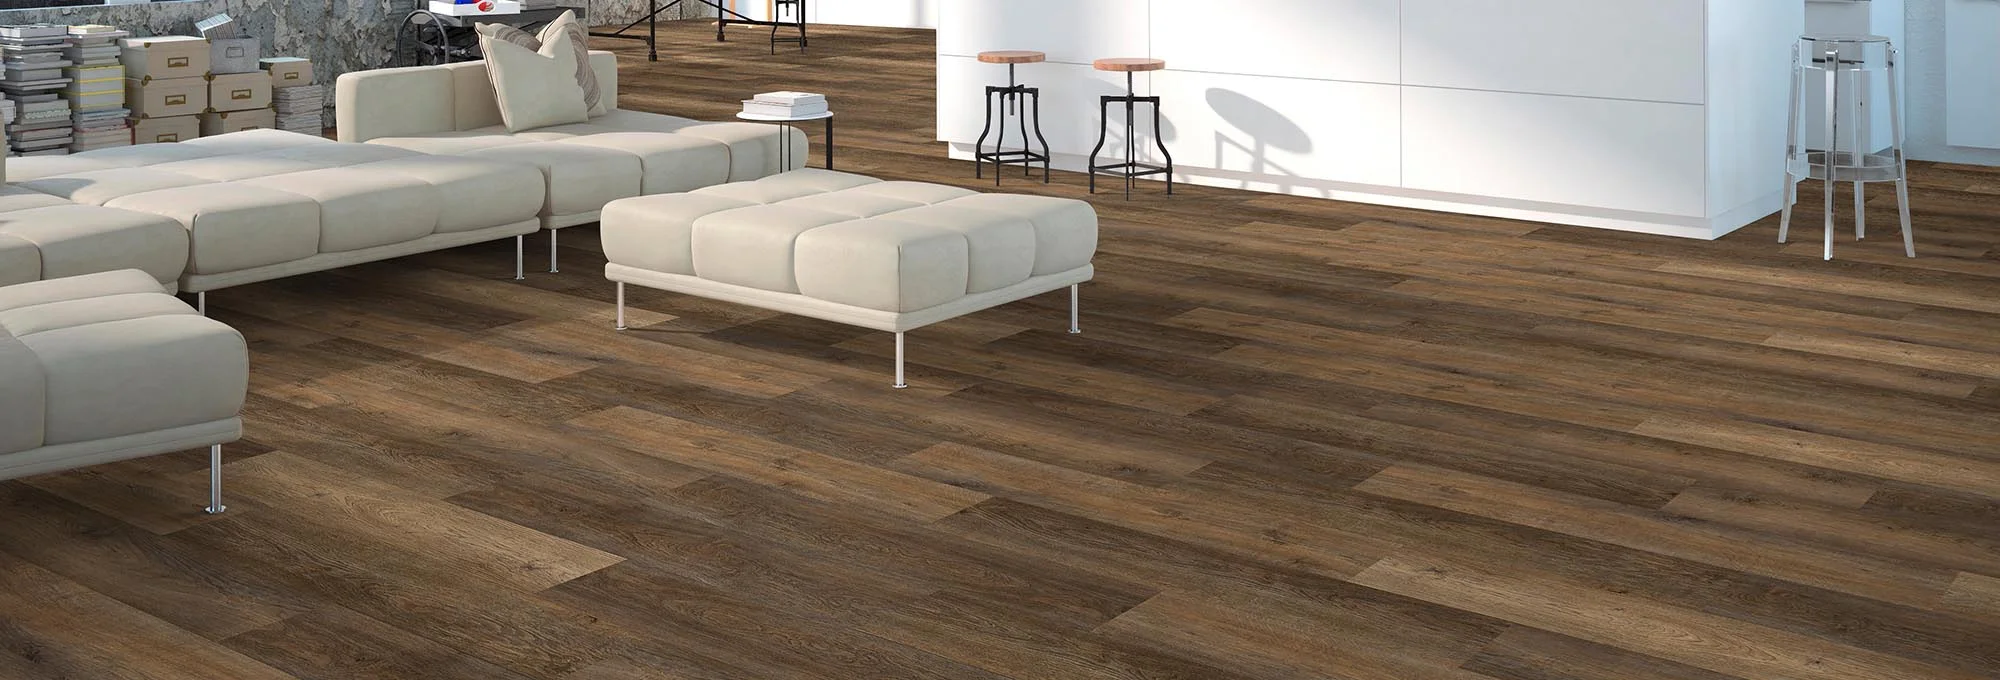 Shop Flooring Products from CarpetsPlus of Fairmont in Fairmont, MN